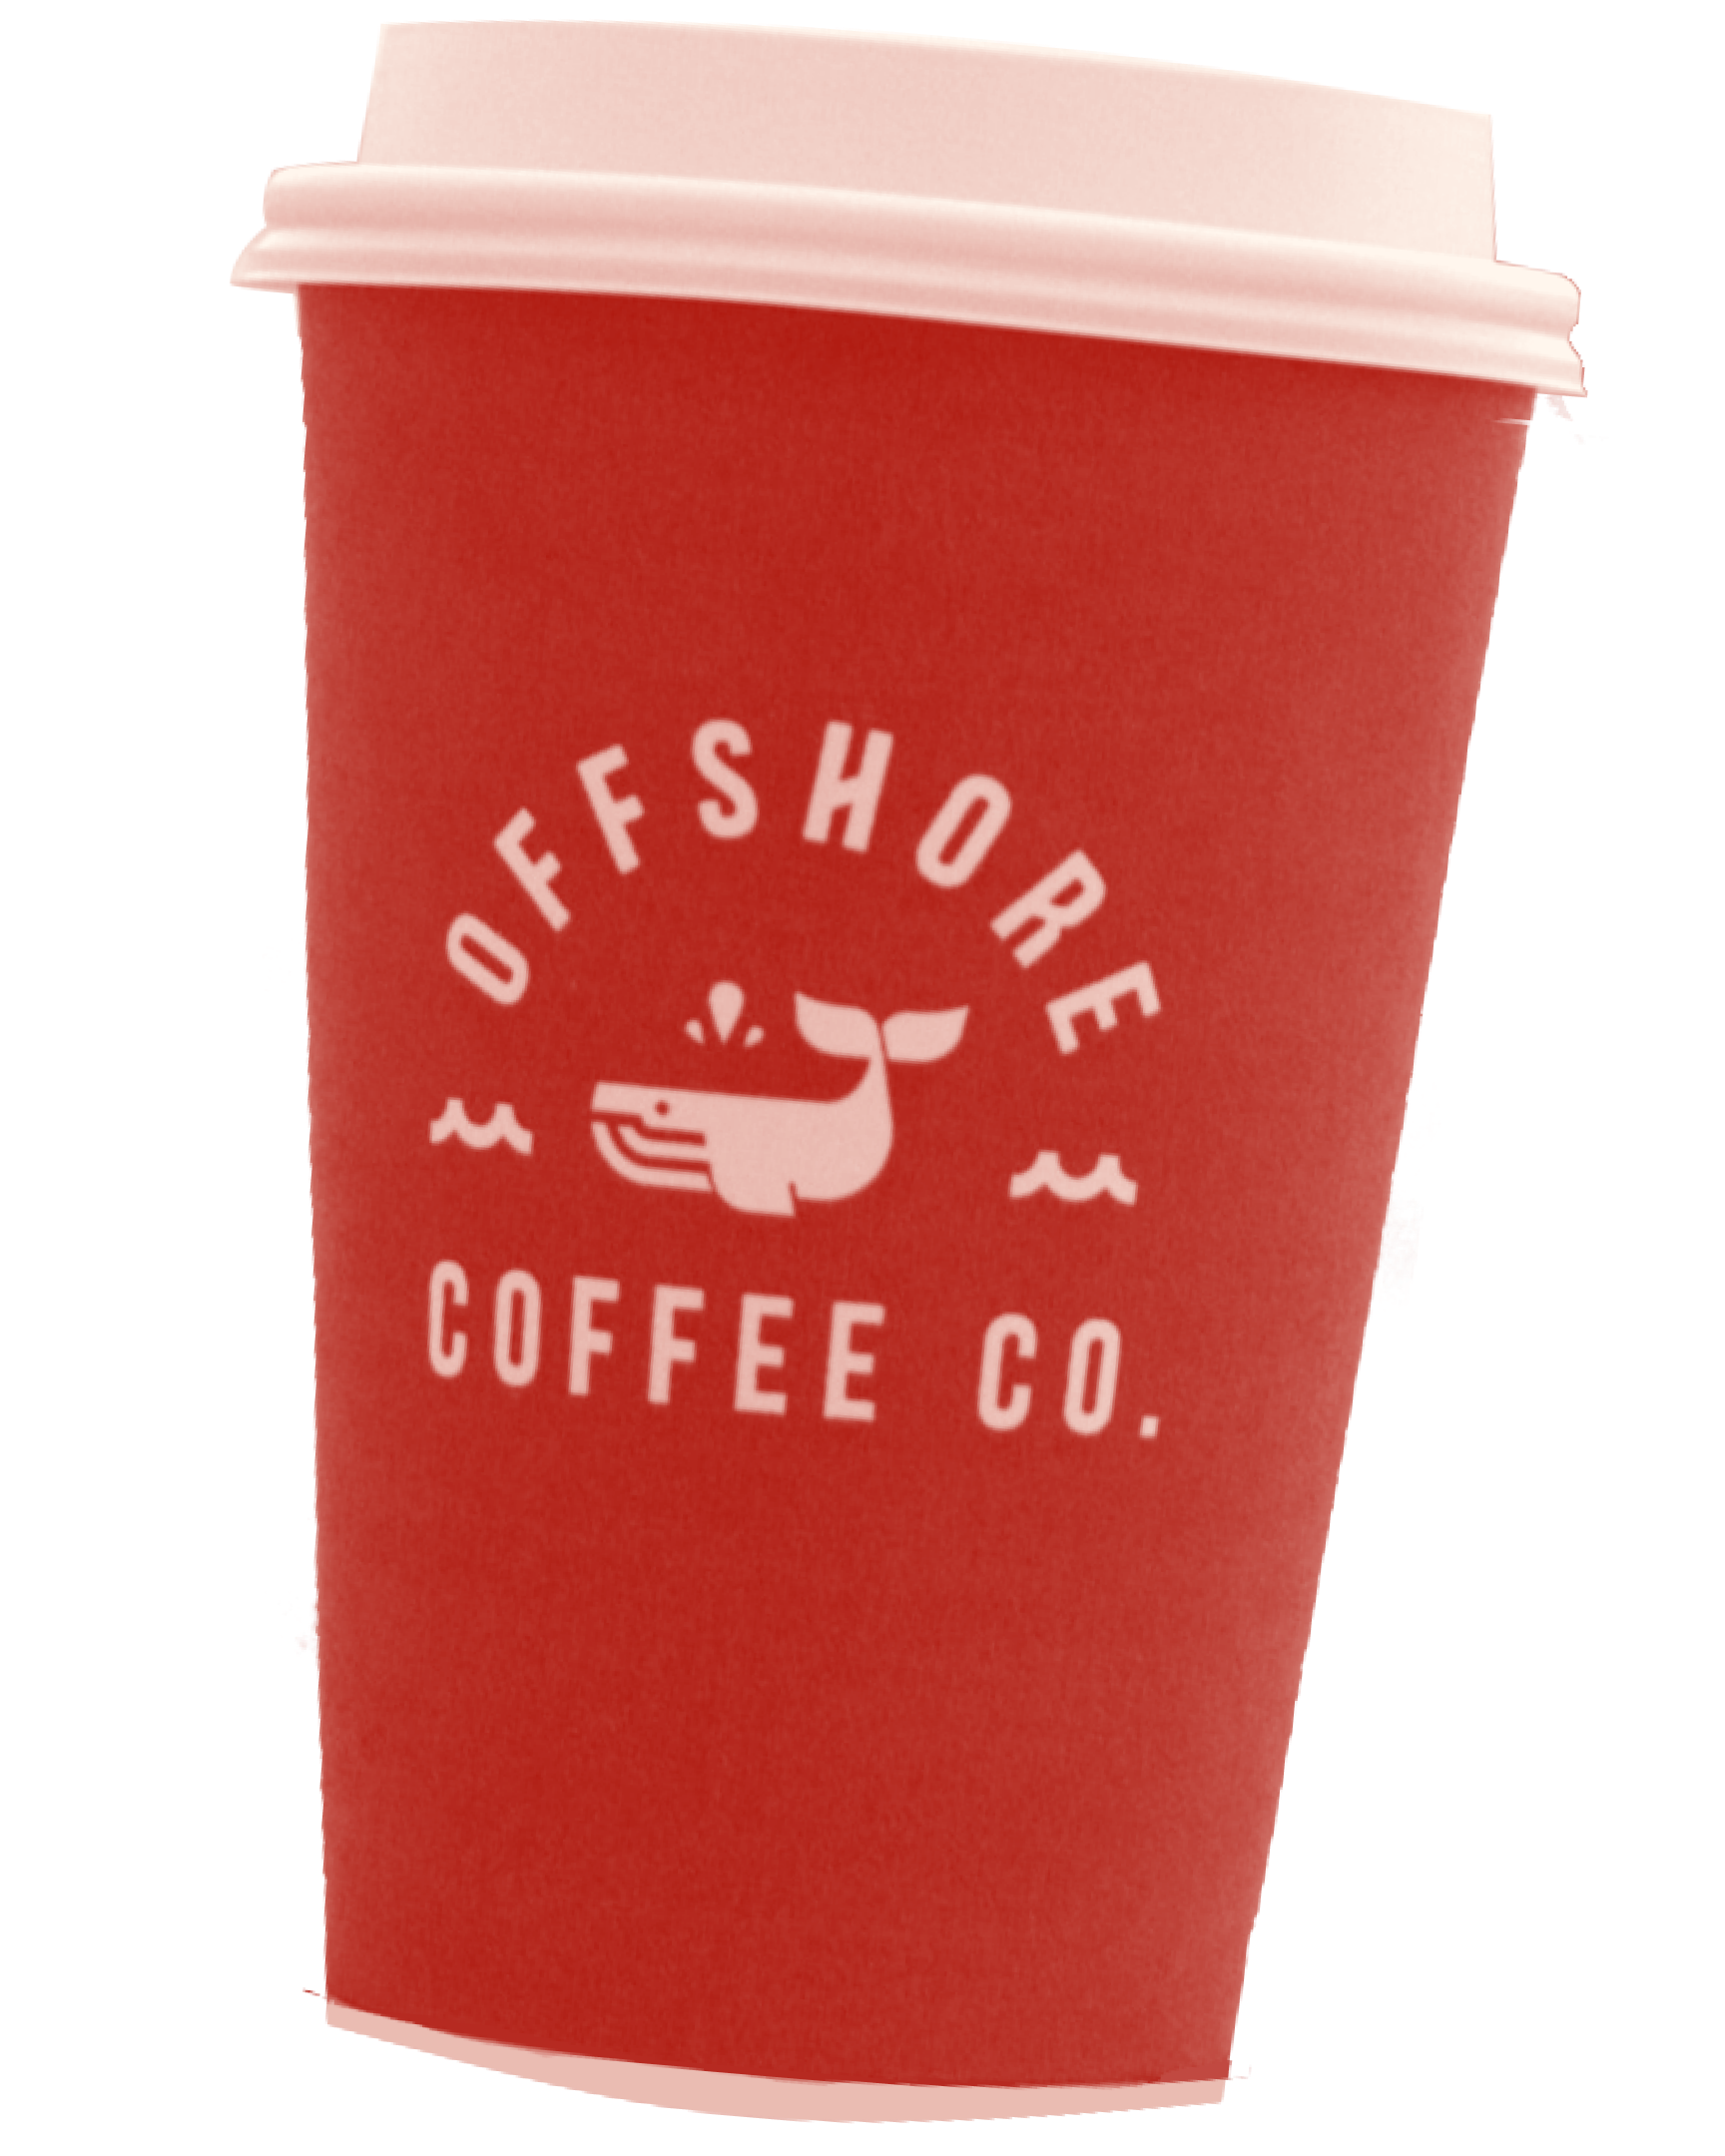 Offshore Coffee Co.